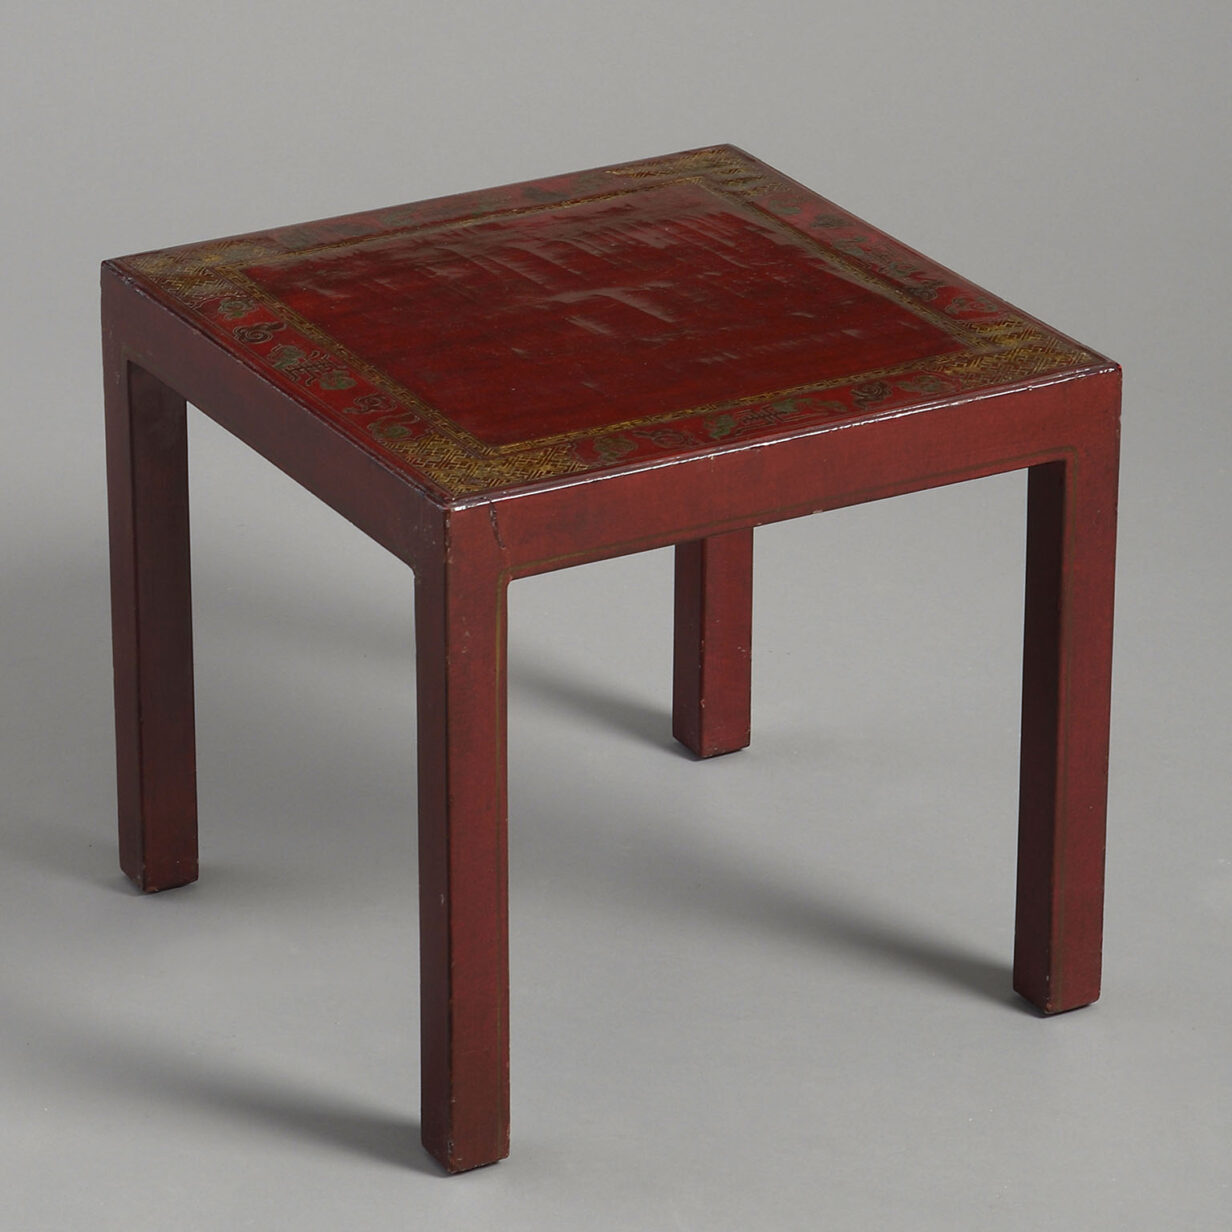 Pair of red lacquer low end tables